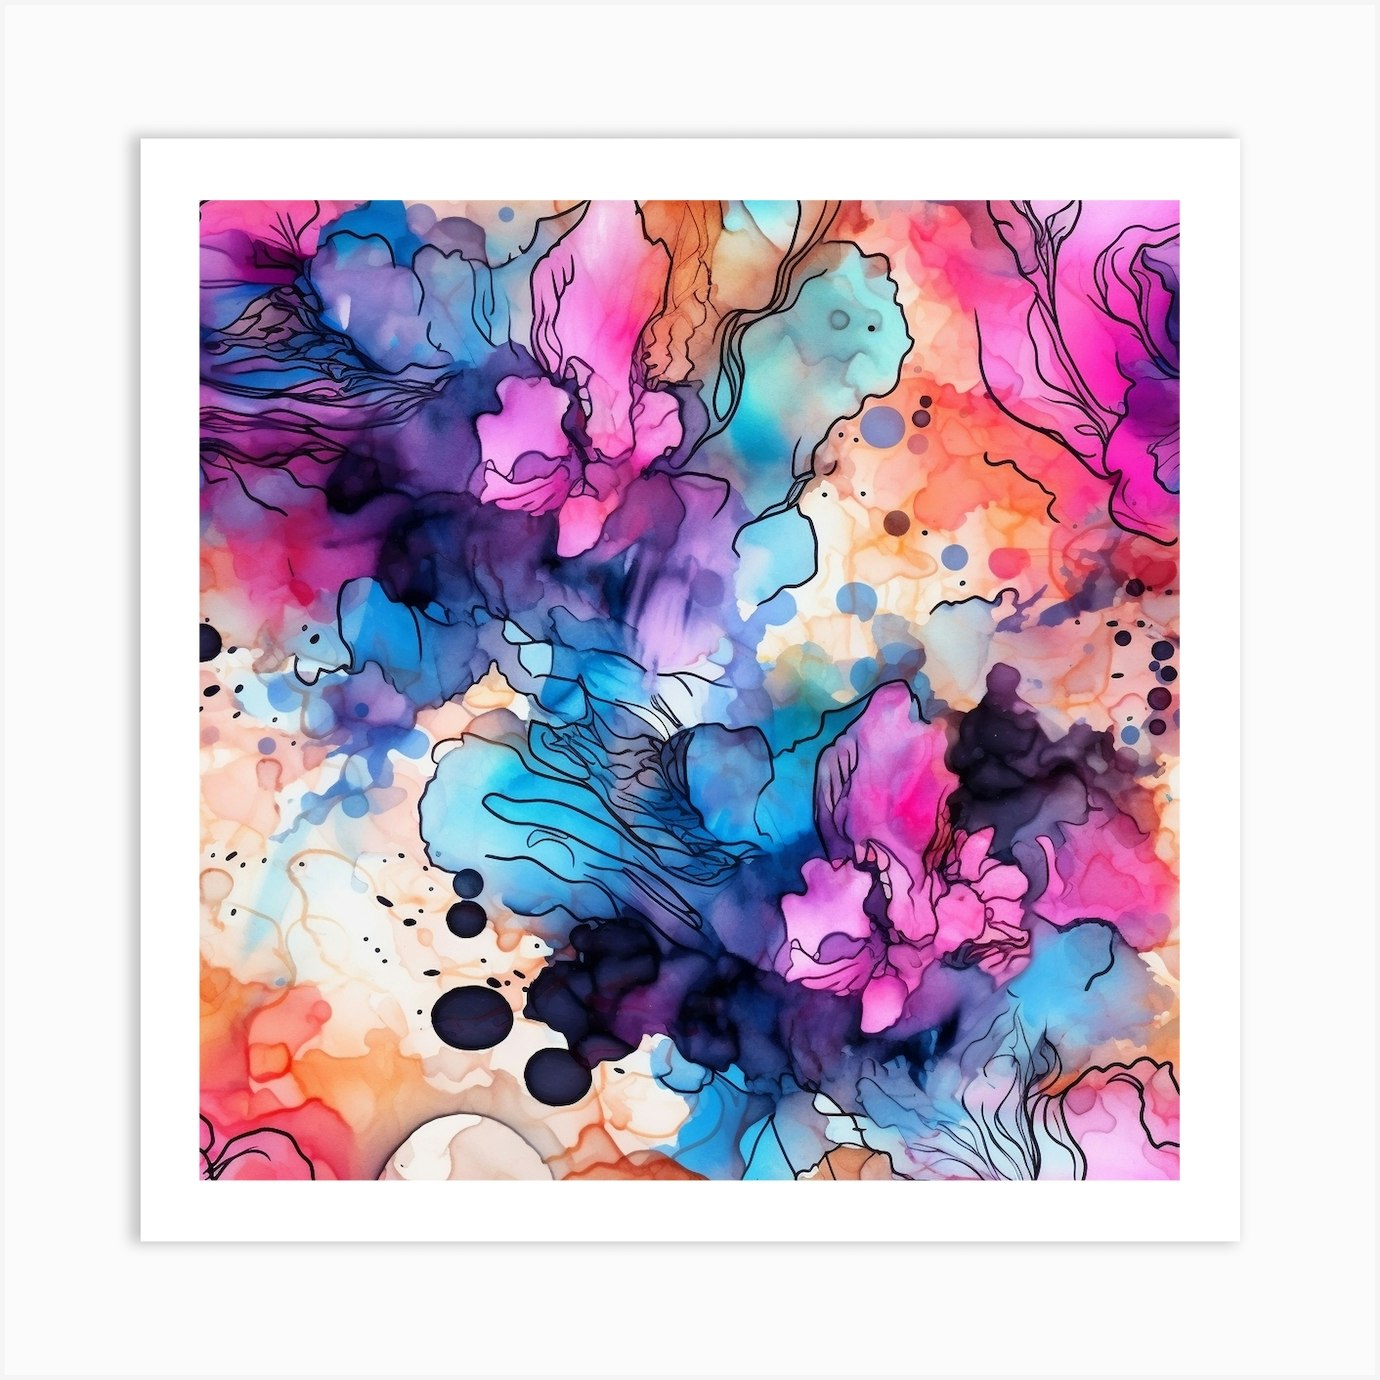 55] Trying a different technique - Abstract alcohol ink art 